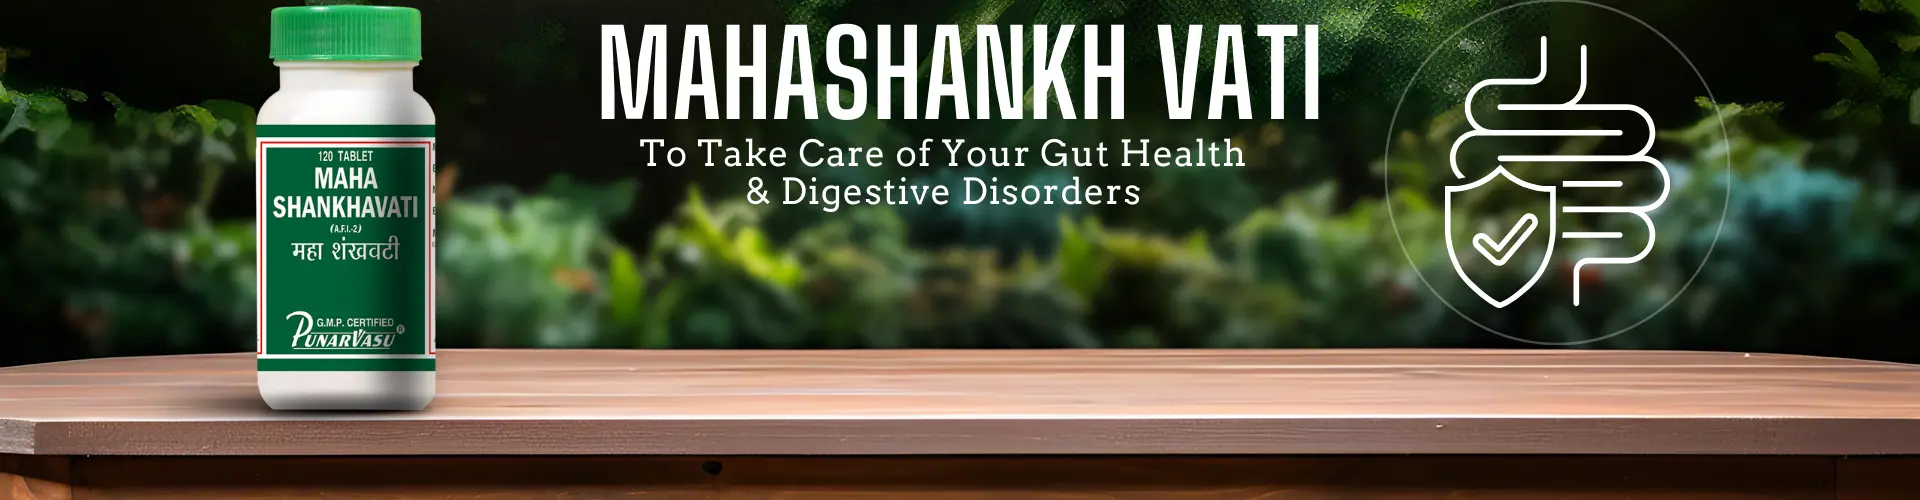 Take Care of Your Gut Health & Digestive Disorders with Maha Shankha Vati